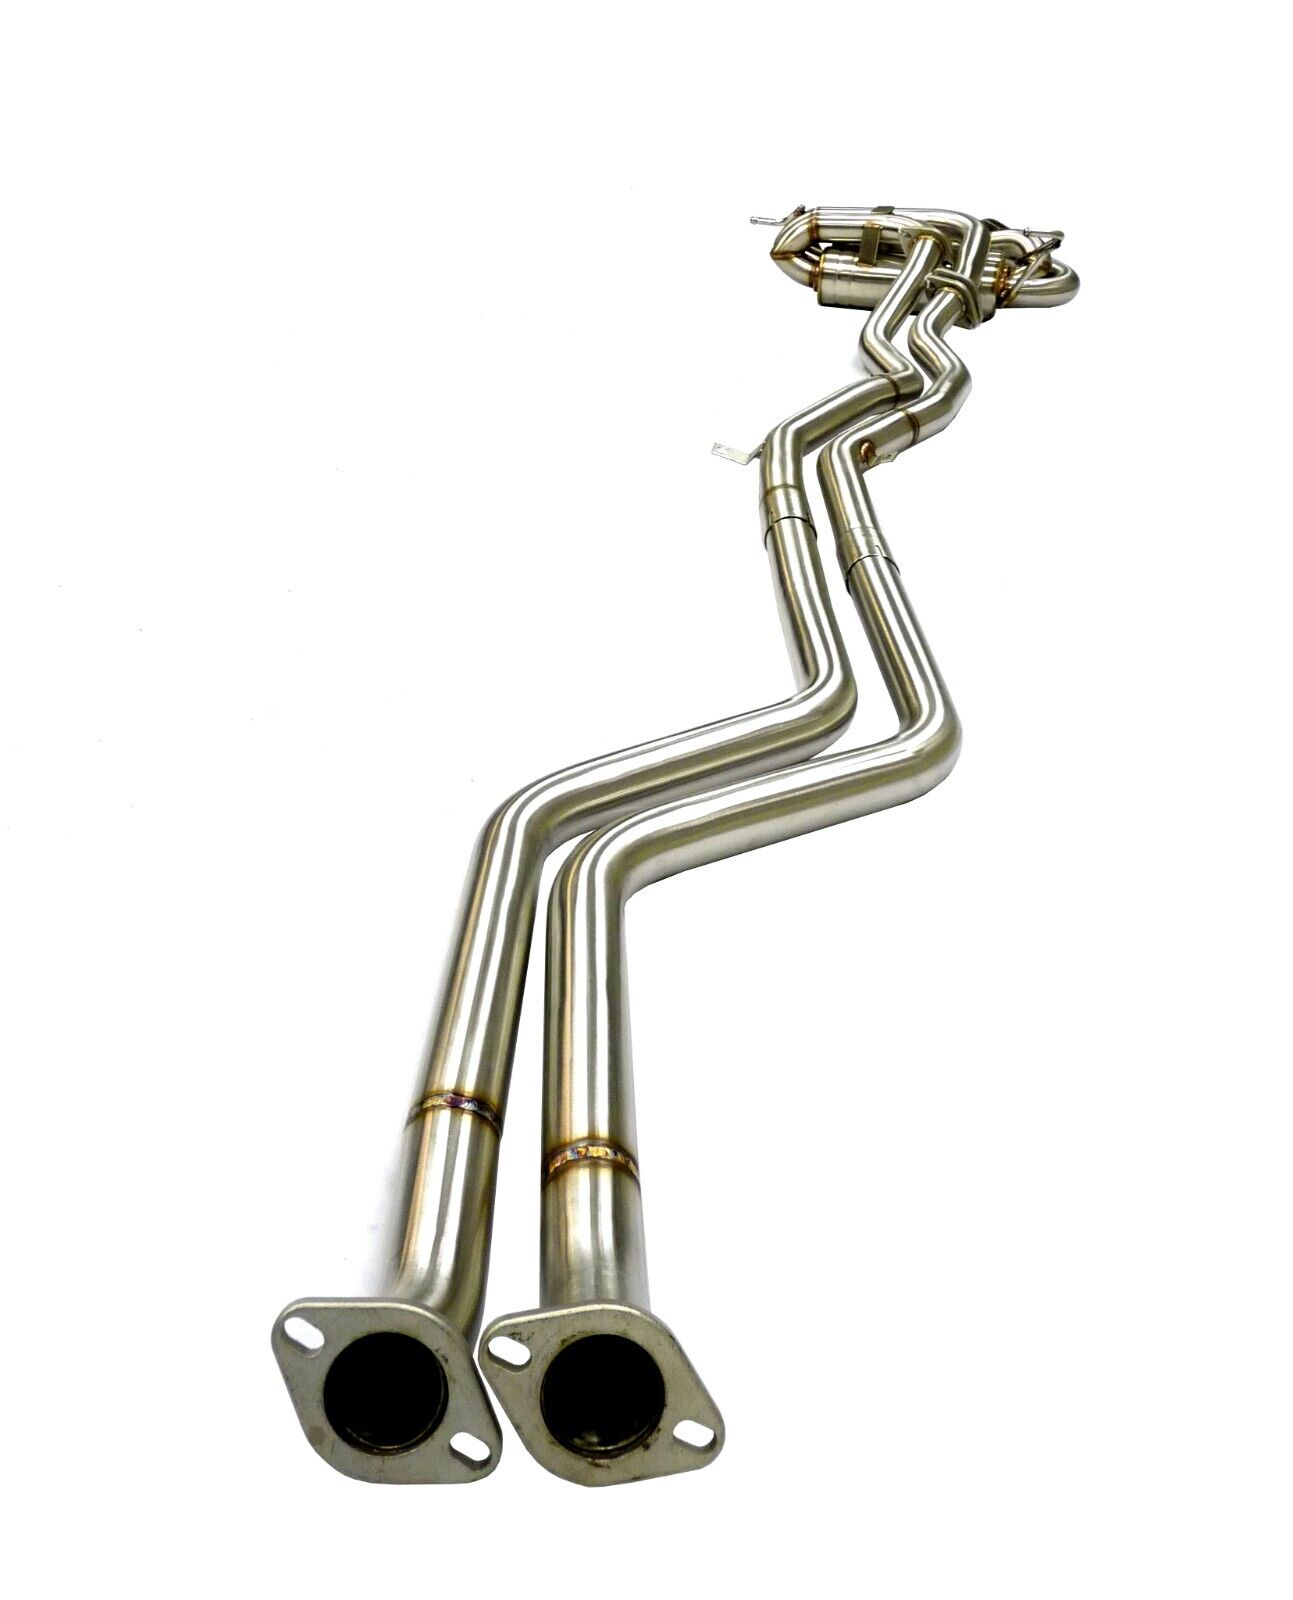 Catback Exhaust Fitment For 03-08 BMW Z4 3.0L By Becker (Flanges Same Direc.)